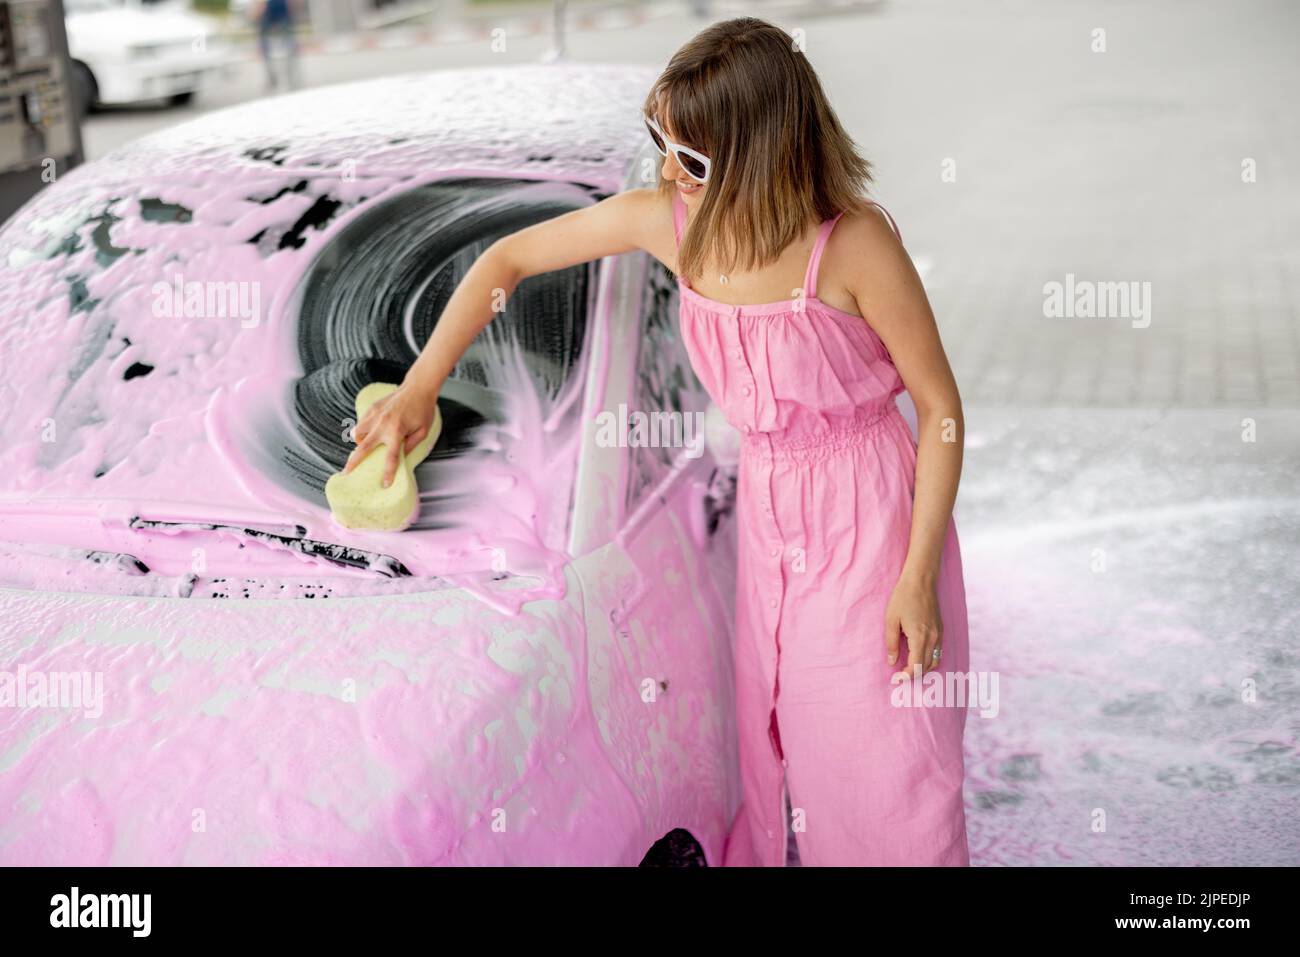 Young woman in pink dress wiping her tiny car covered in nano foam with a sponge at car wash. Concept of easy and beautiful self-service at car wash Stock Photo